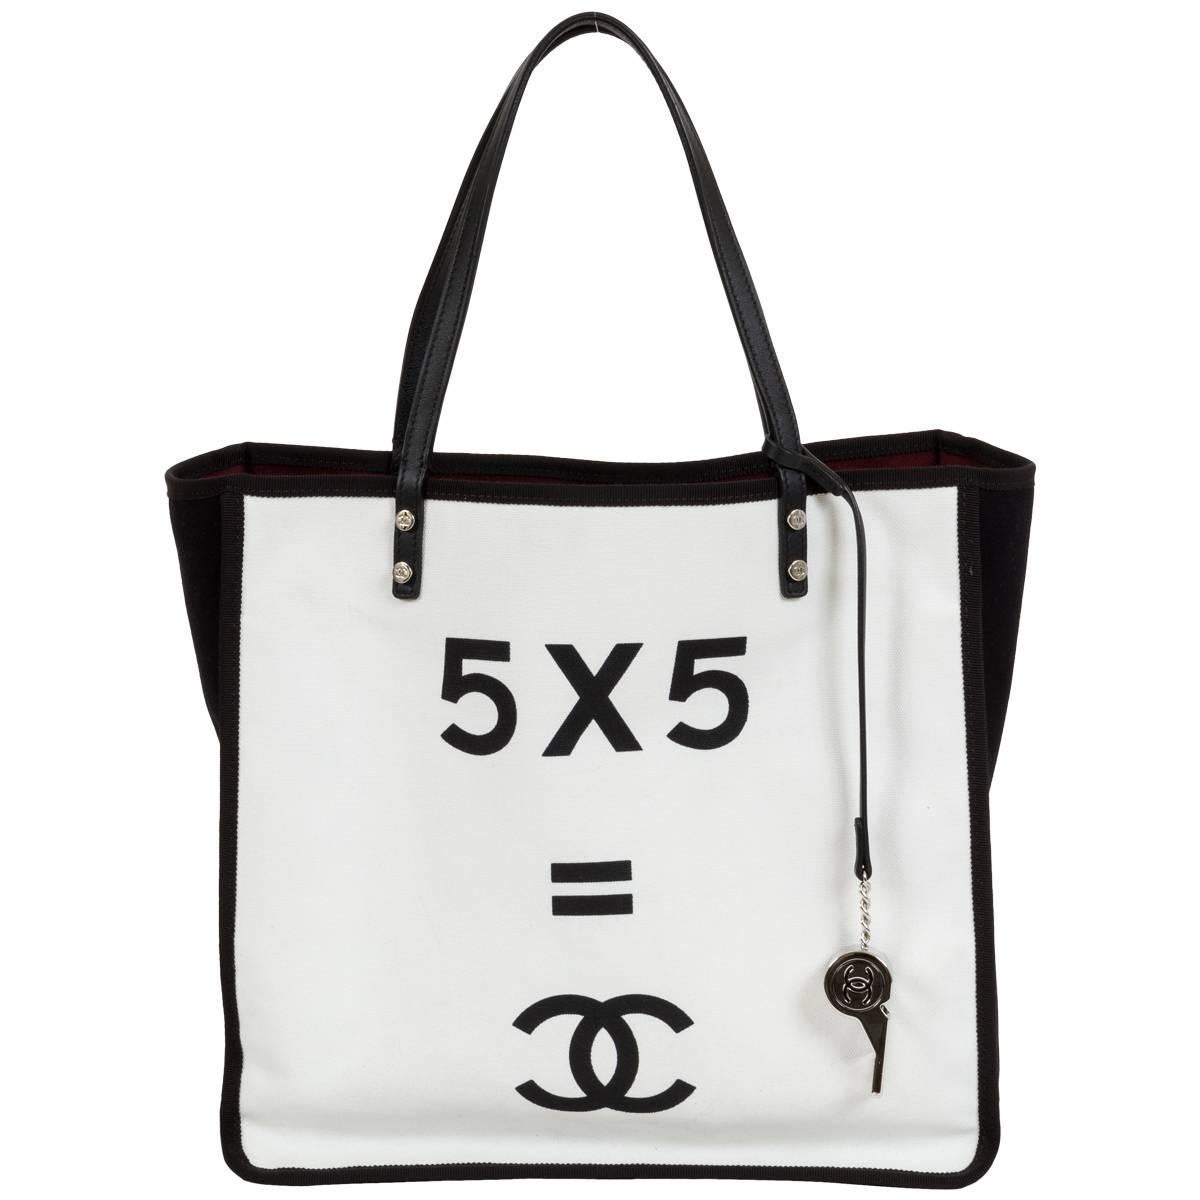 Chanel Large Black & White Canvas Tote